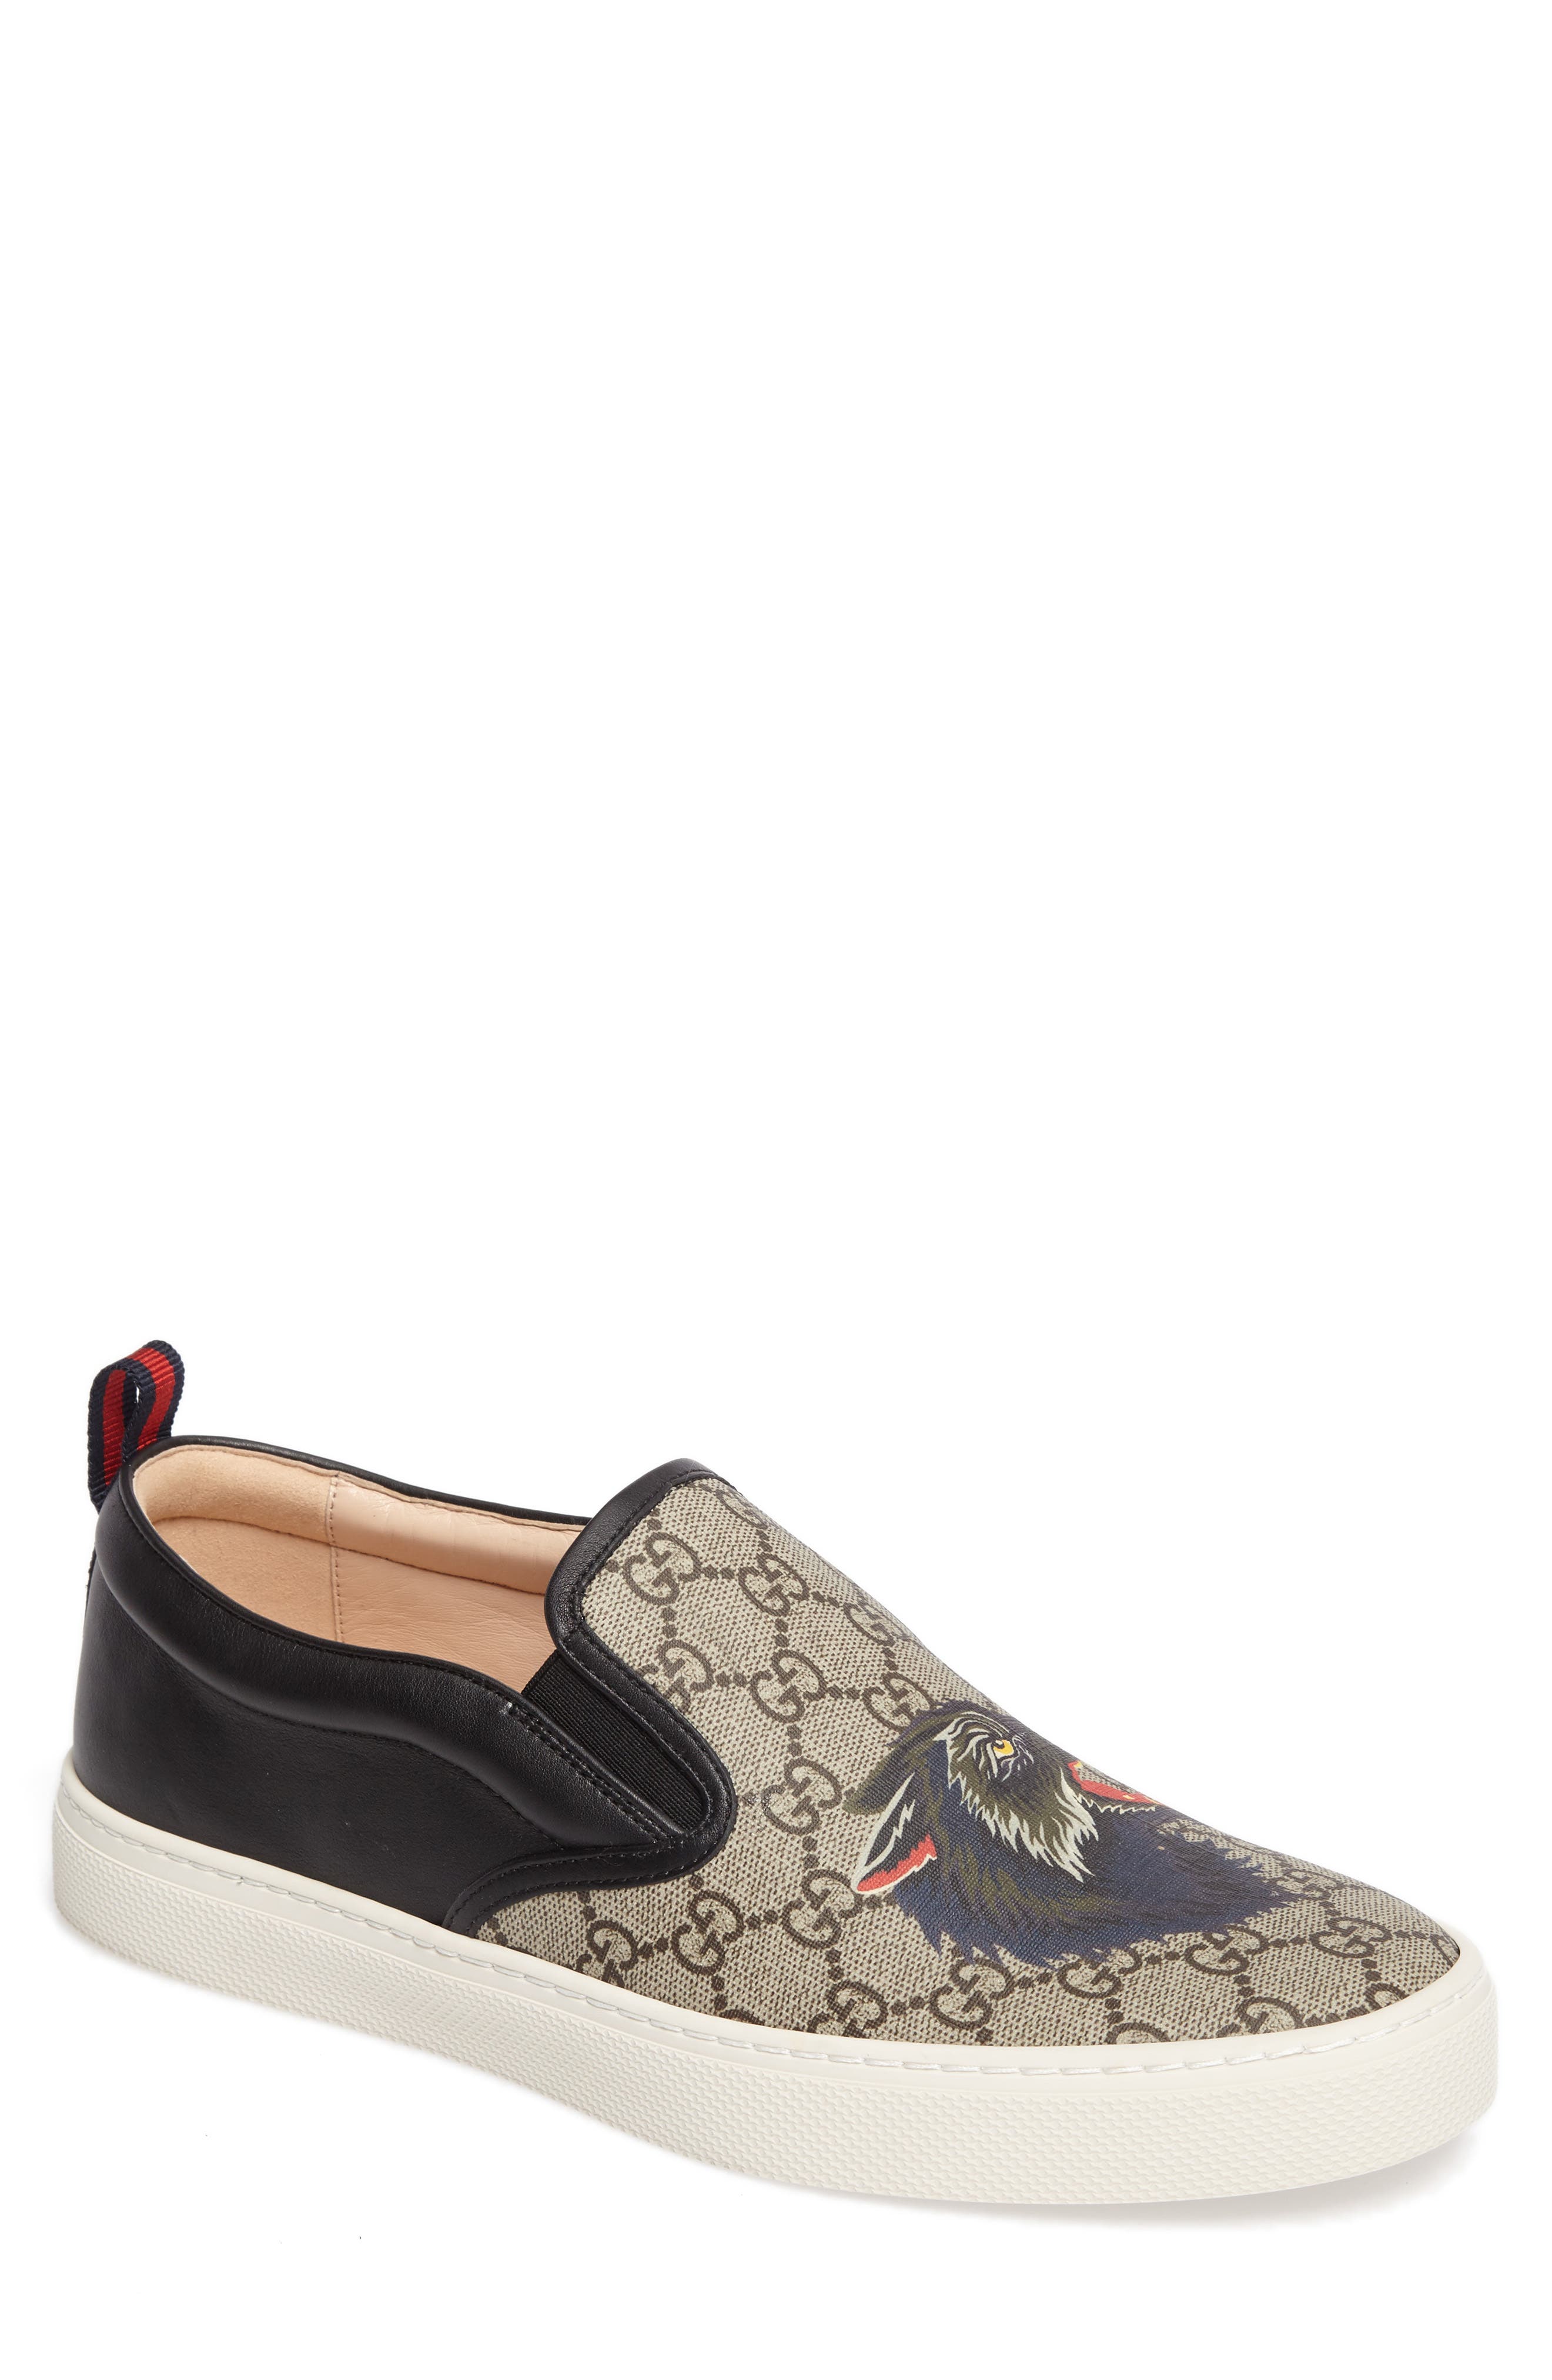 slip on gucci sneakers